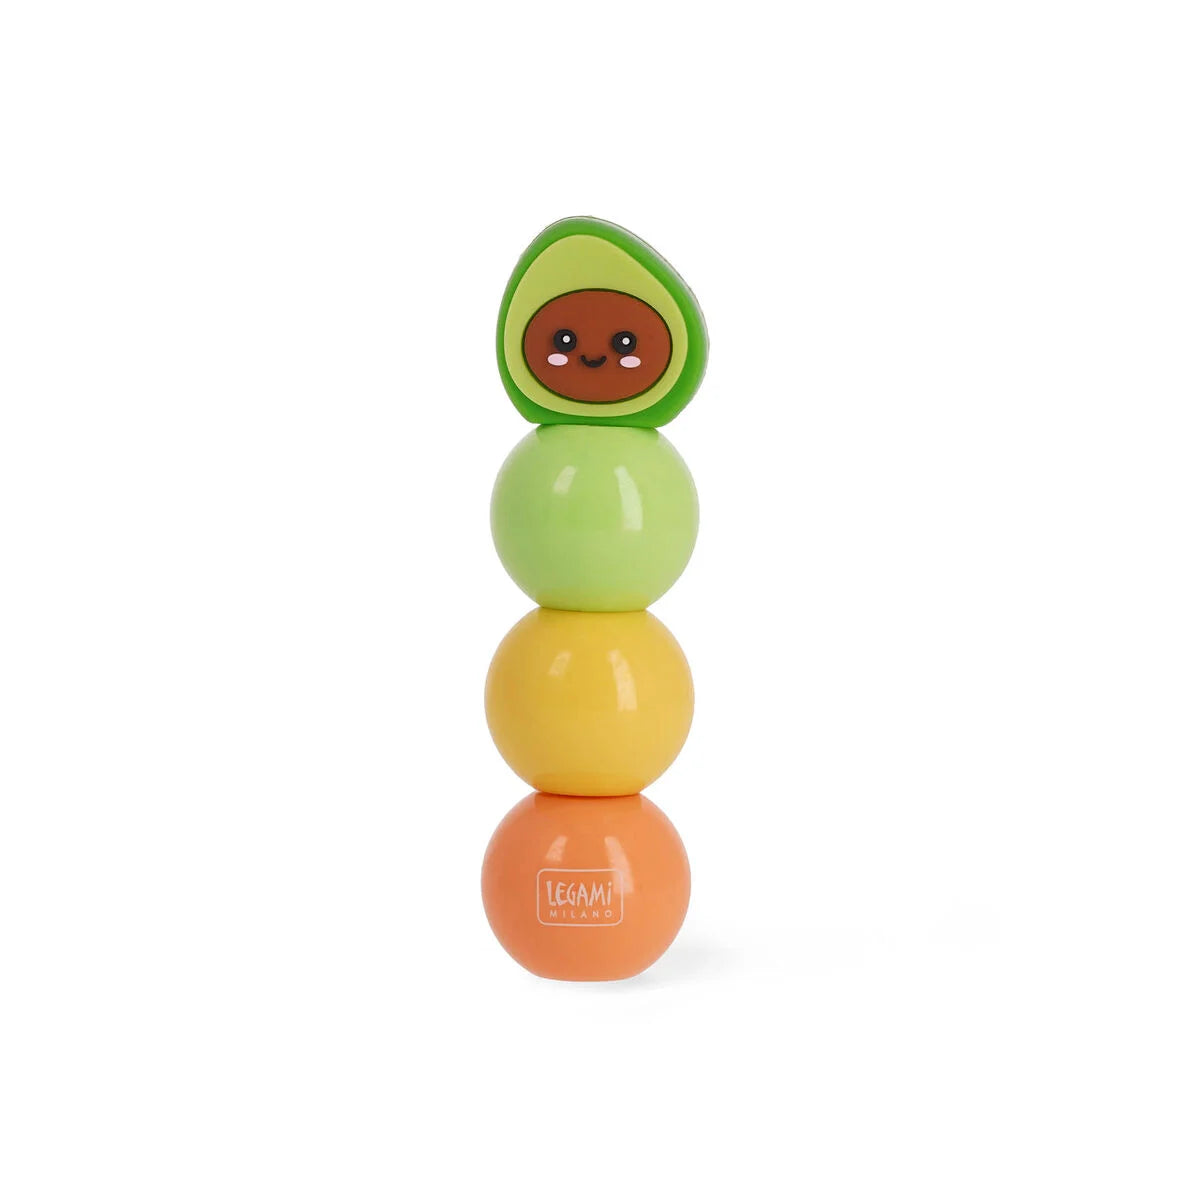 Back to School | Legami 3-In-1 Highlighter - Avocado by Weirs of Baggot Street